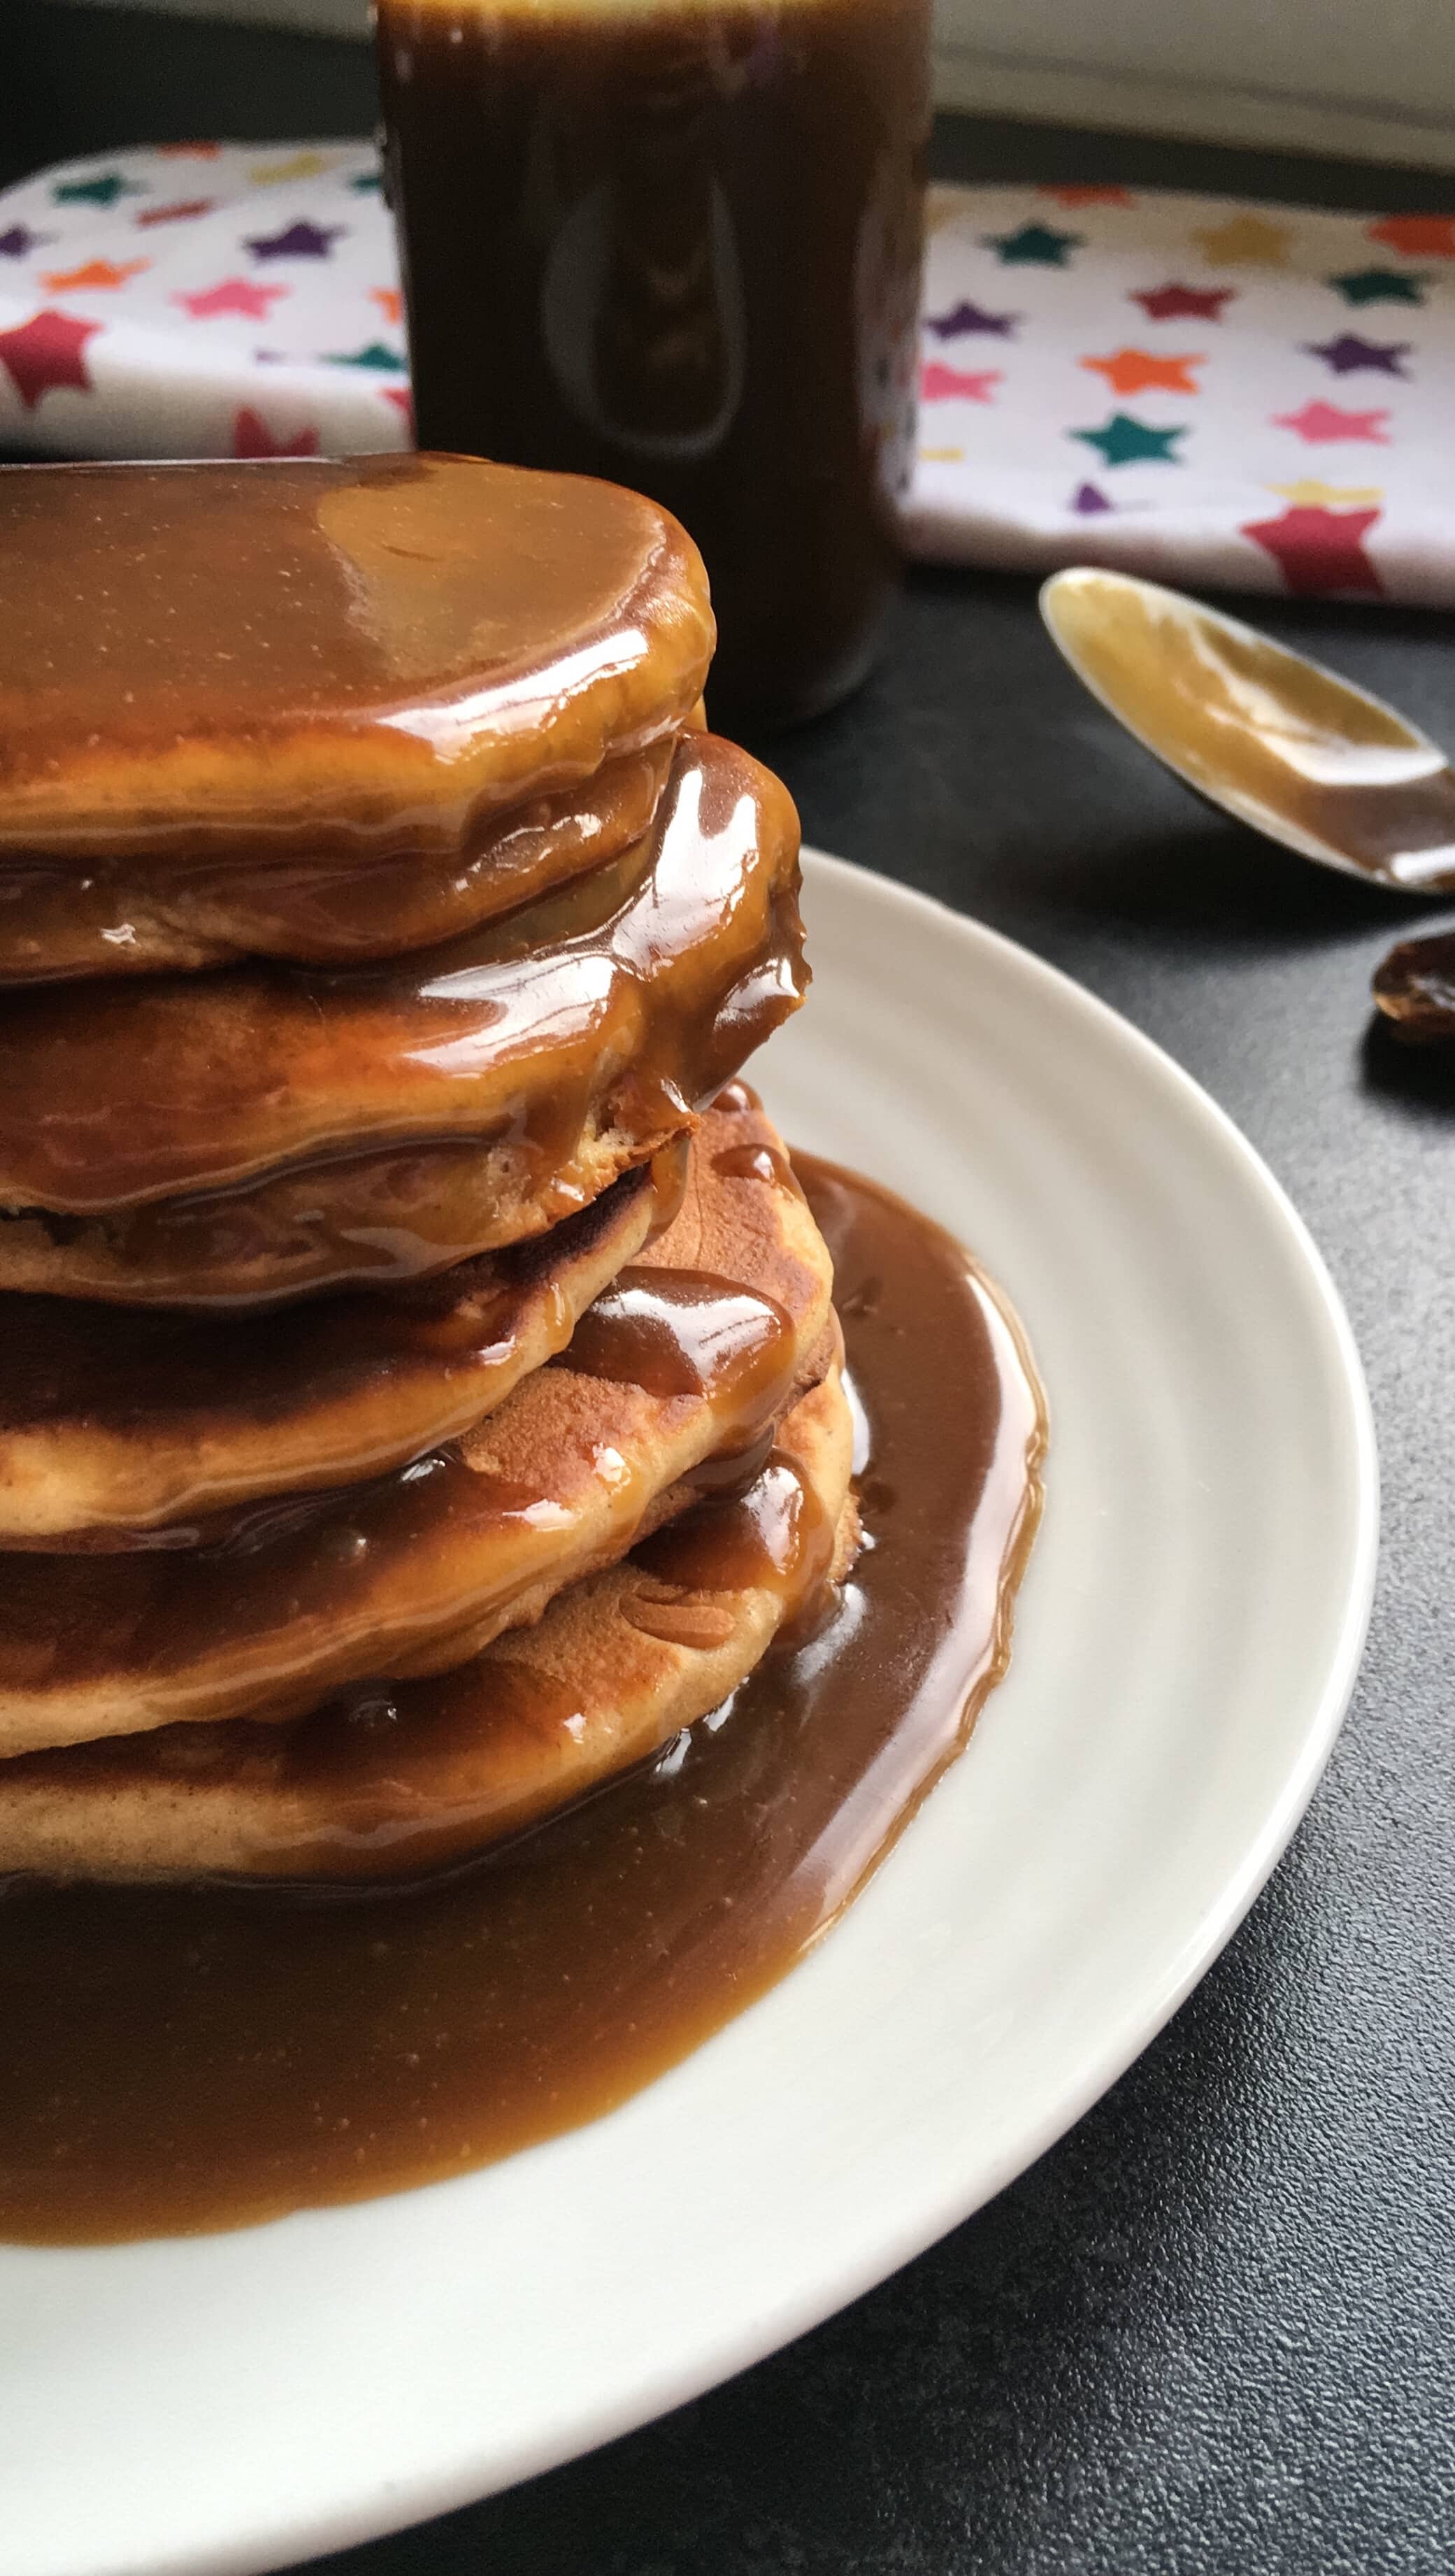 A close up picture of a stack of pancakes covered in a rich toffee sauce.